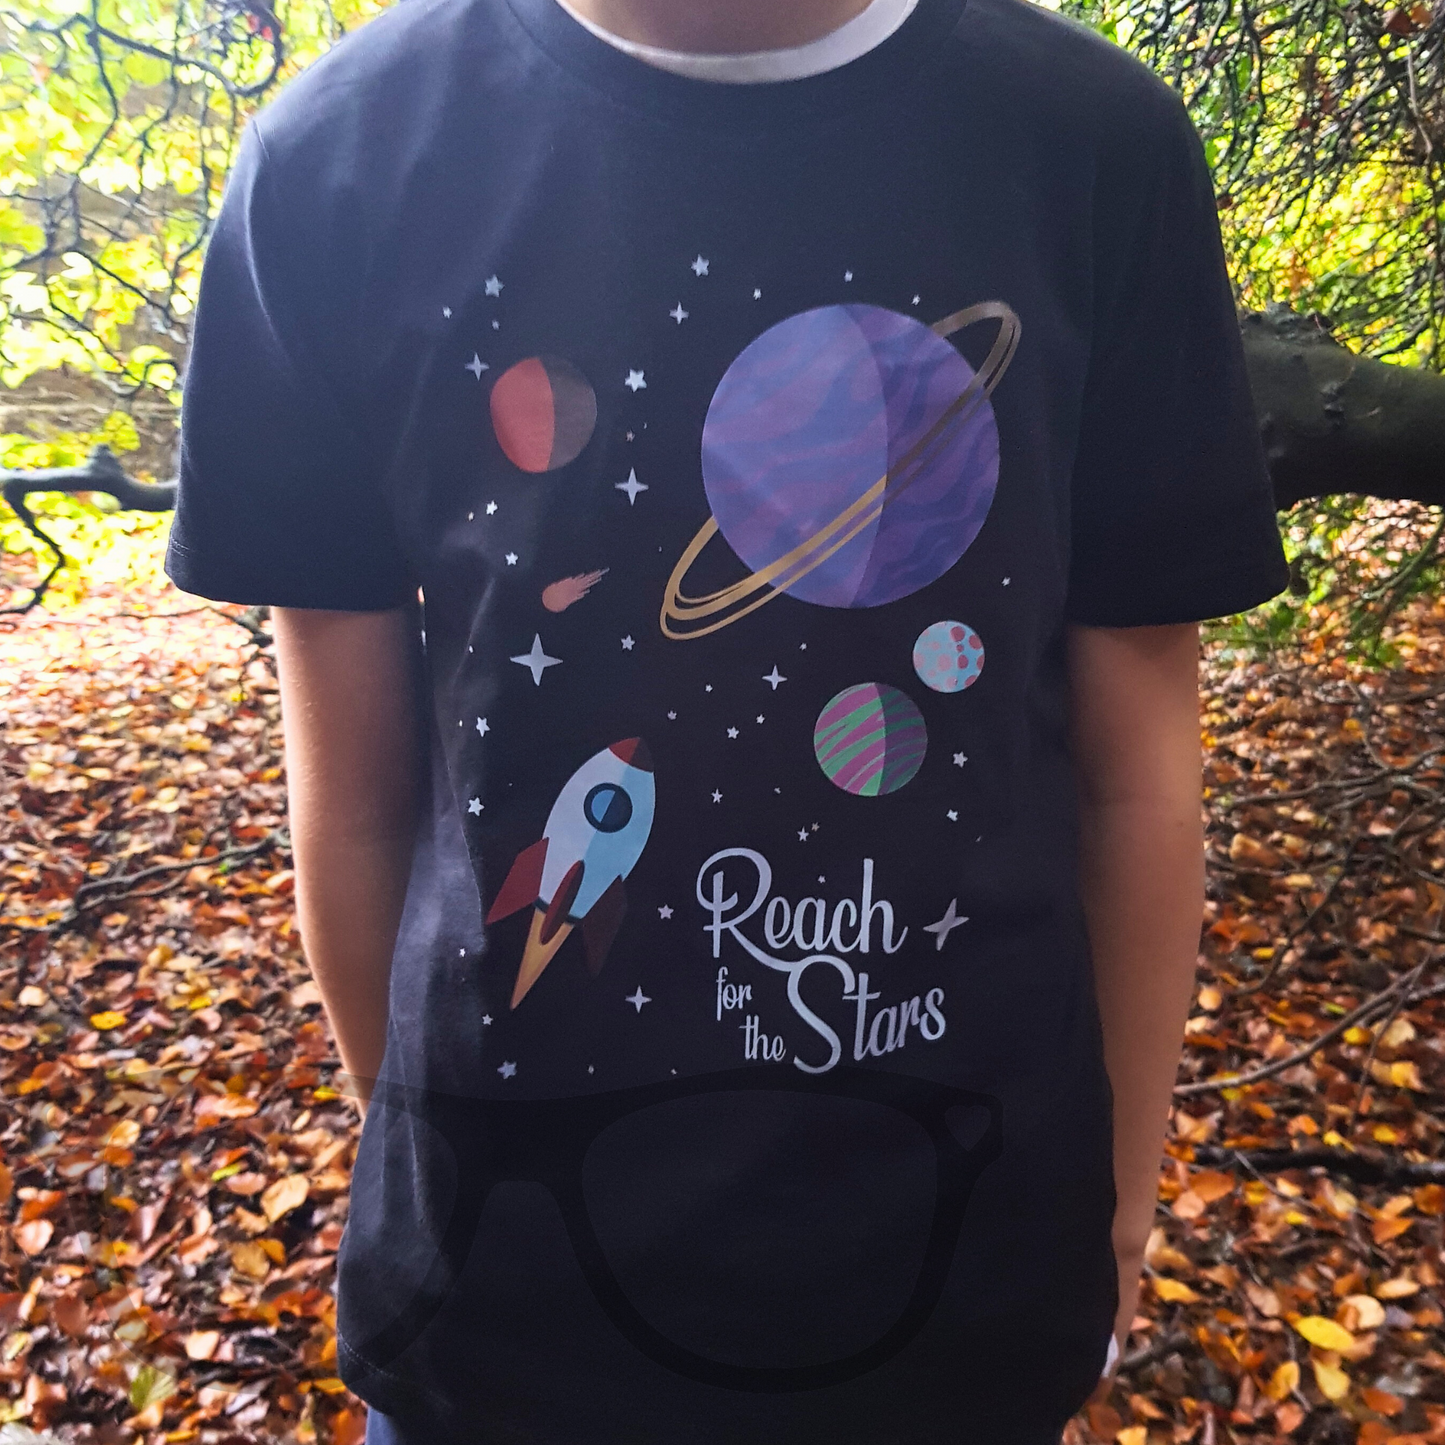 Reach for the stars space themed full colour design featuring a rocket in space on a black organic cotton t-shirt